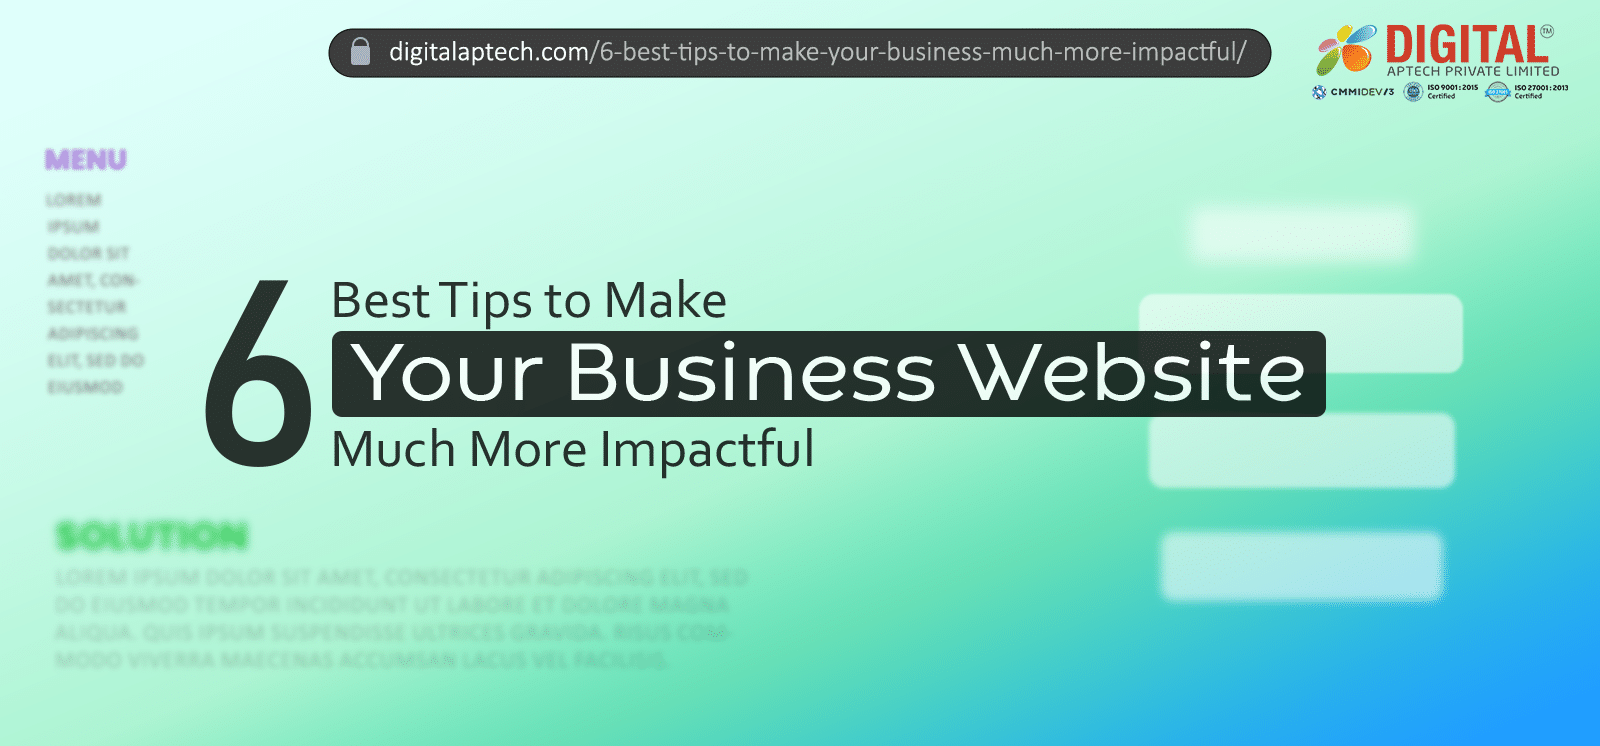 6 Best Tips to Make Your Business Website Much More Impactful